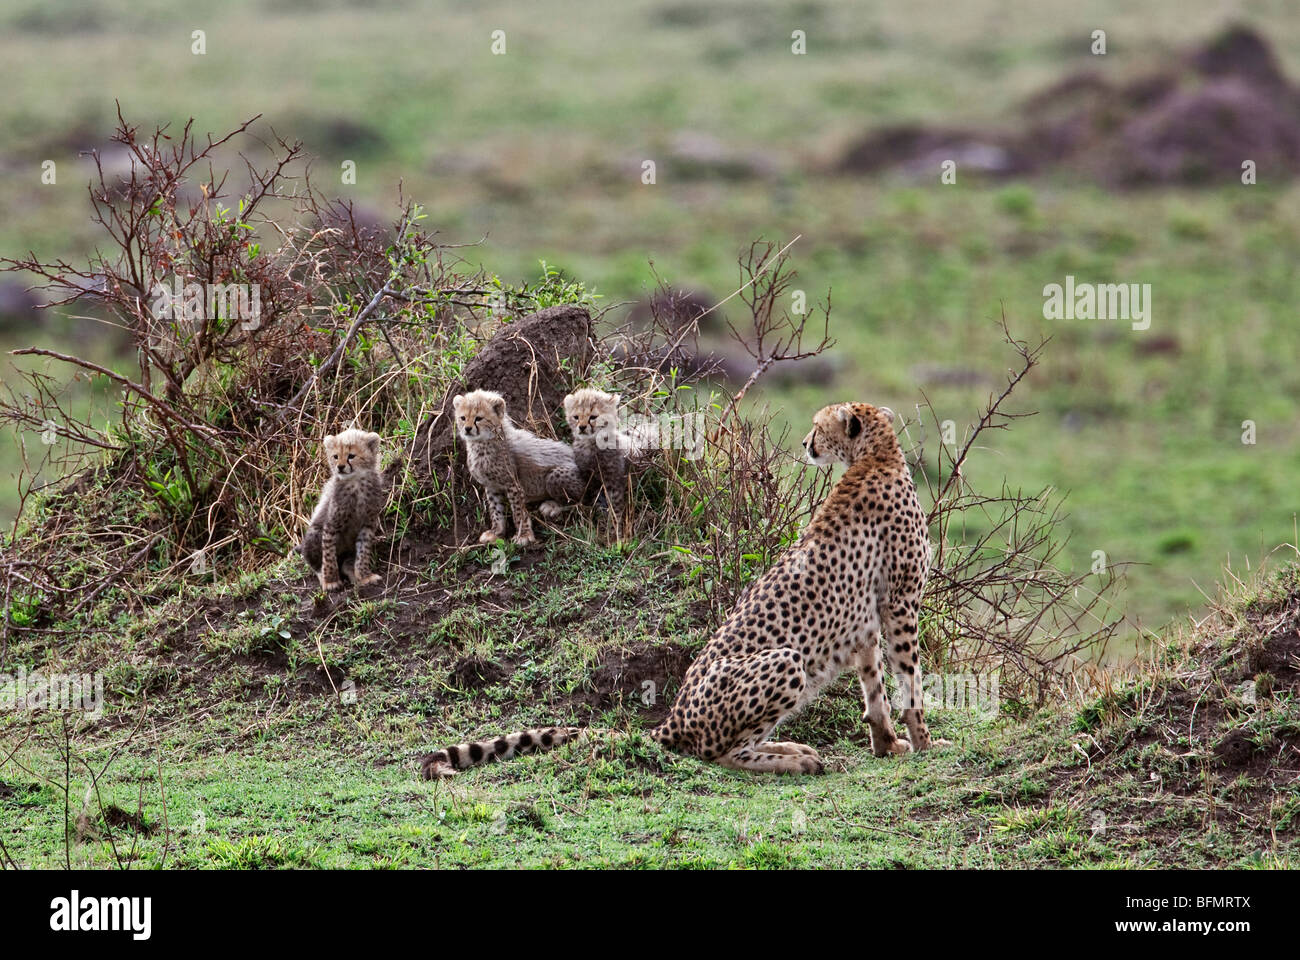 Kenya. A cheetah and her three one-month-old cubs keep watch from termite mounds in Masai Mara National Reserve. Stock Photo